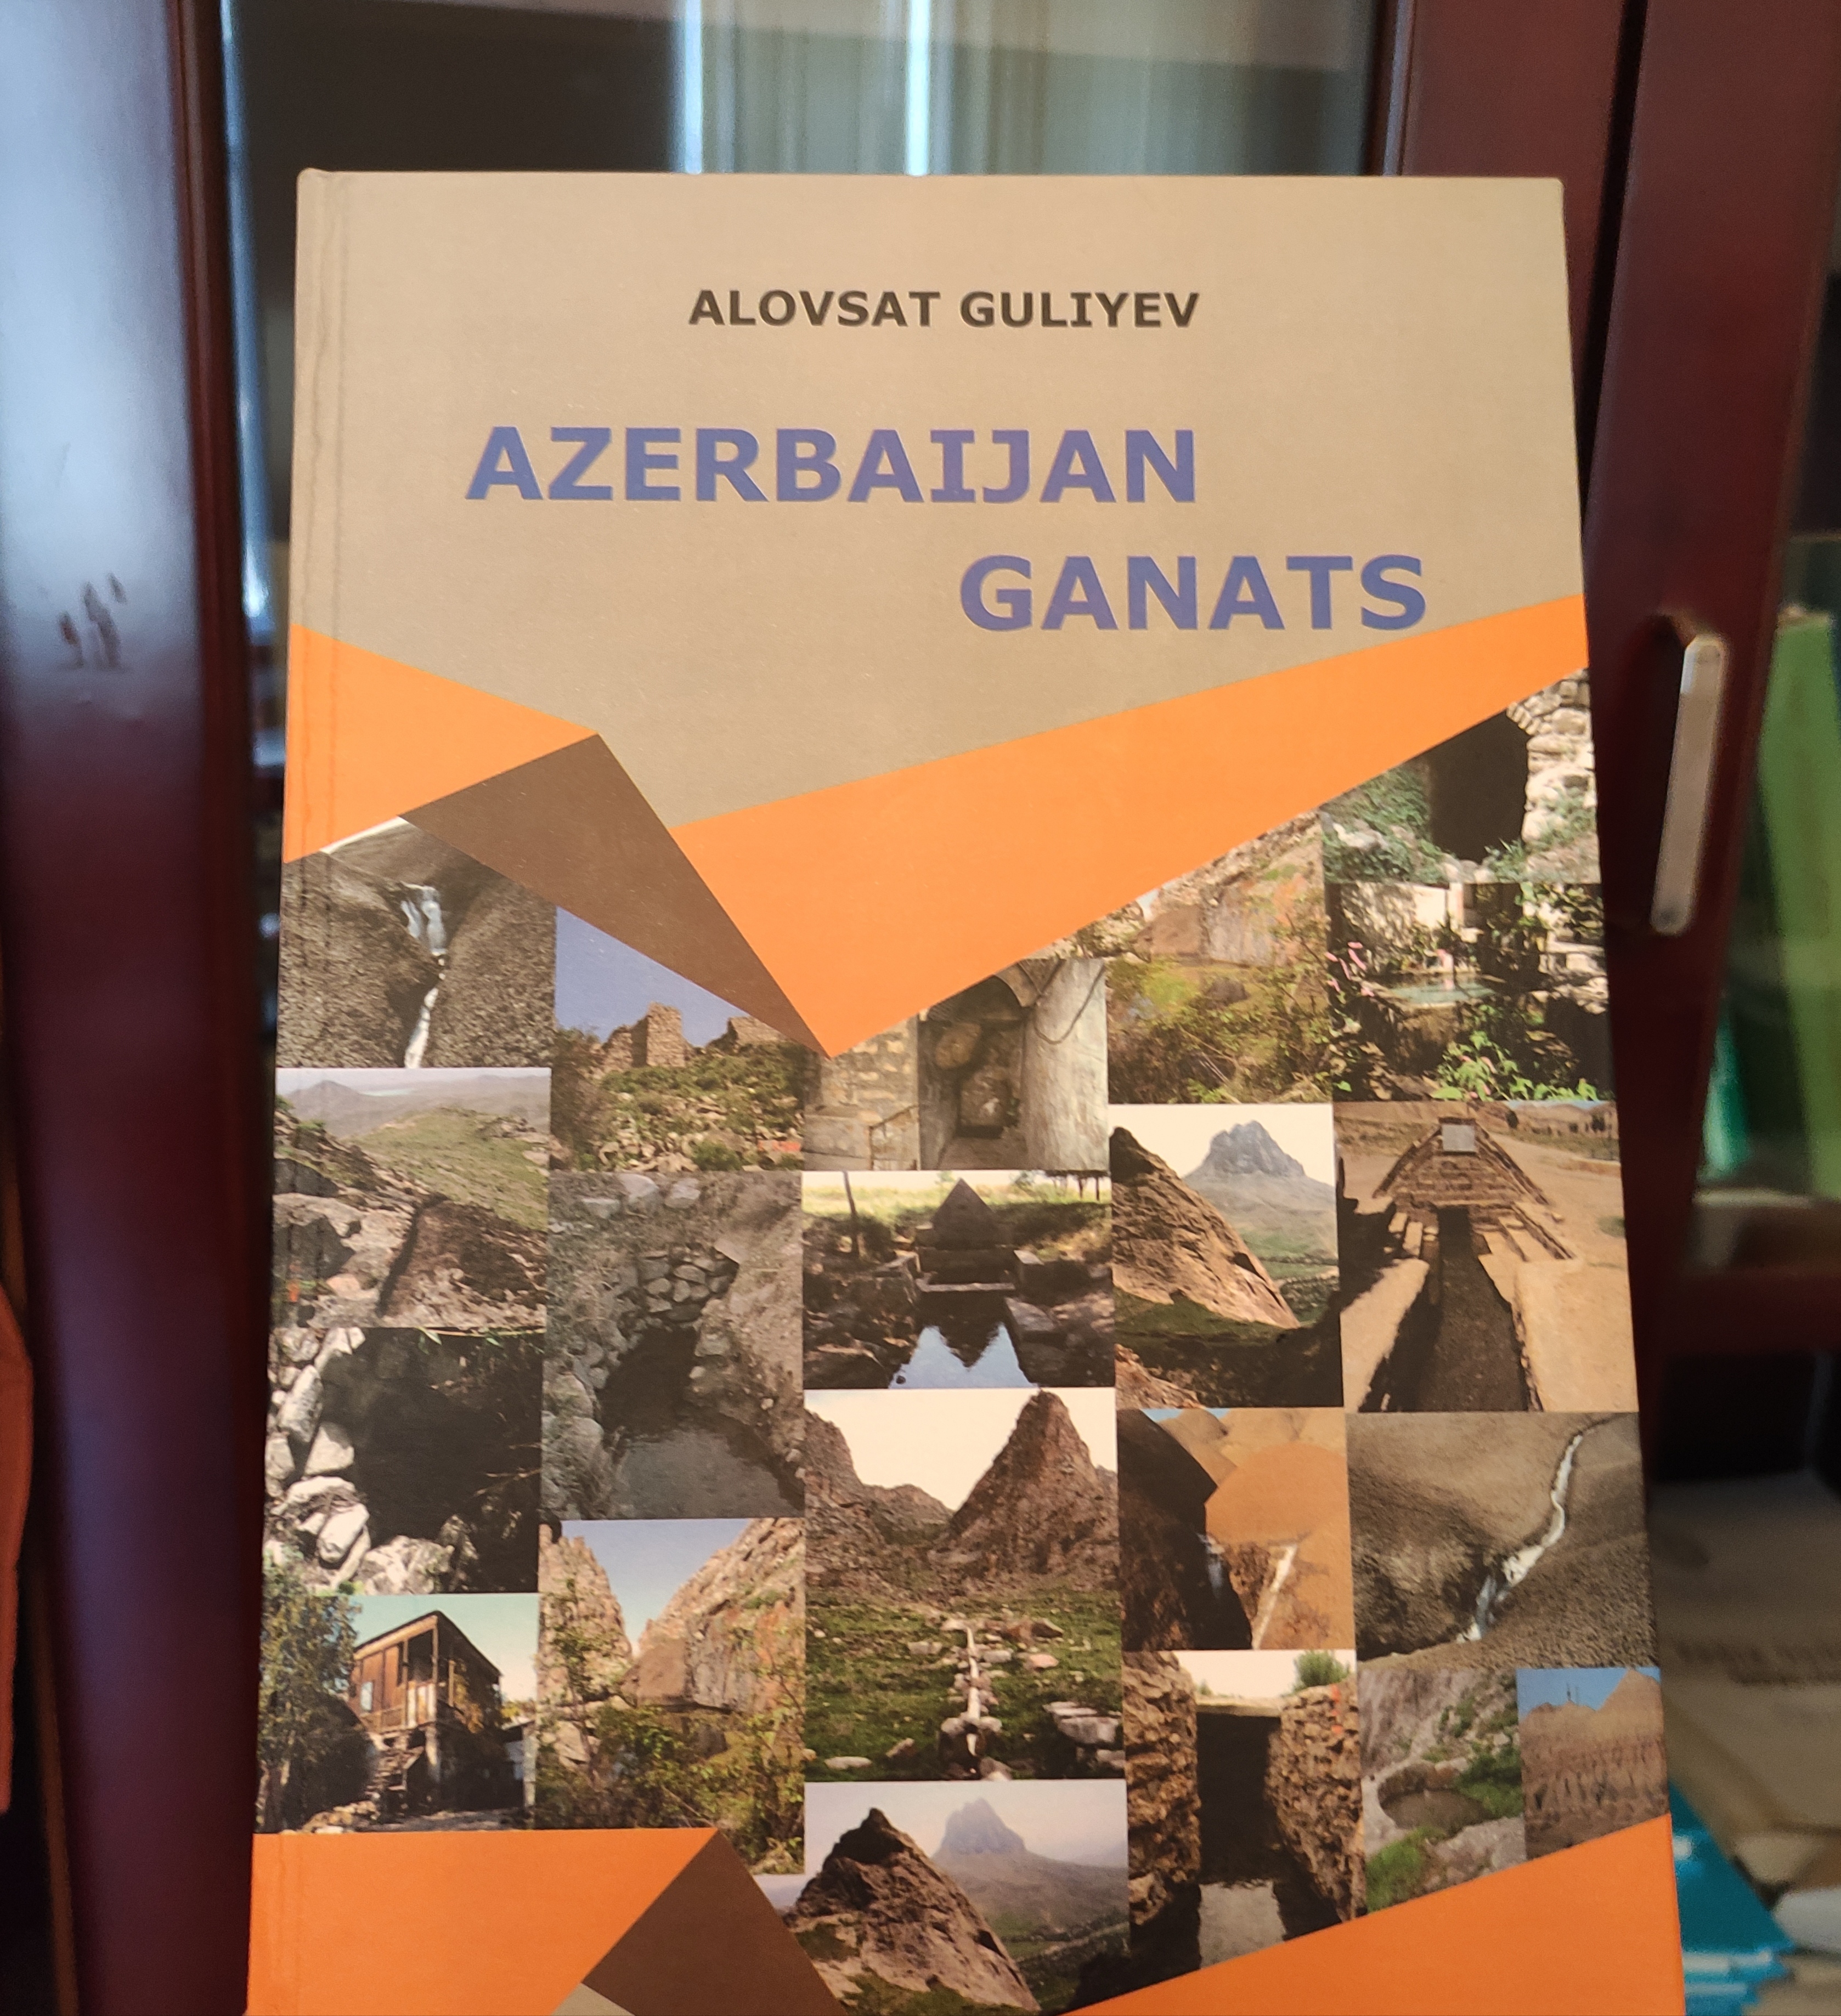  Alovsat Guliyev's book "Kahriz canals of Azerbaijan" has been published in English.